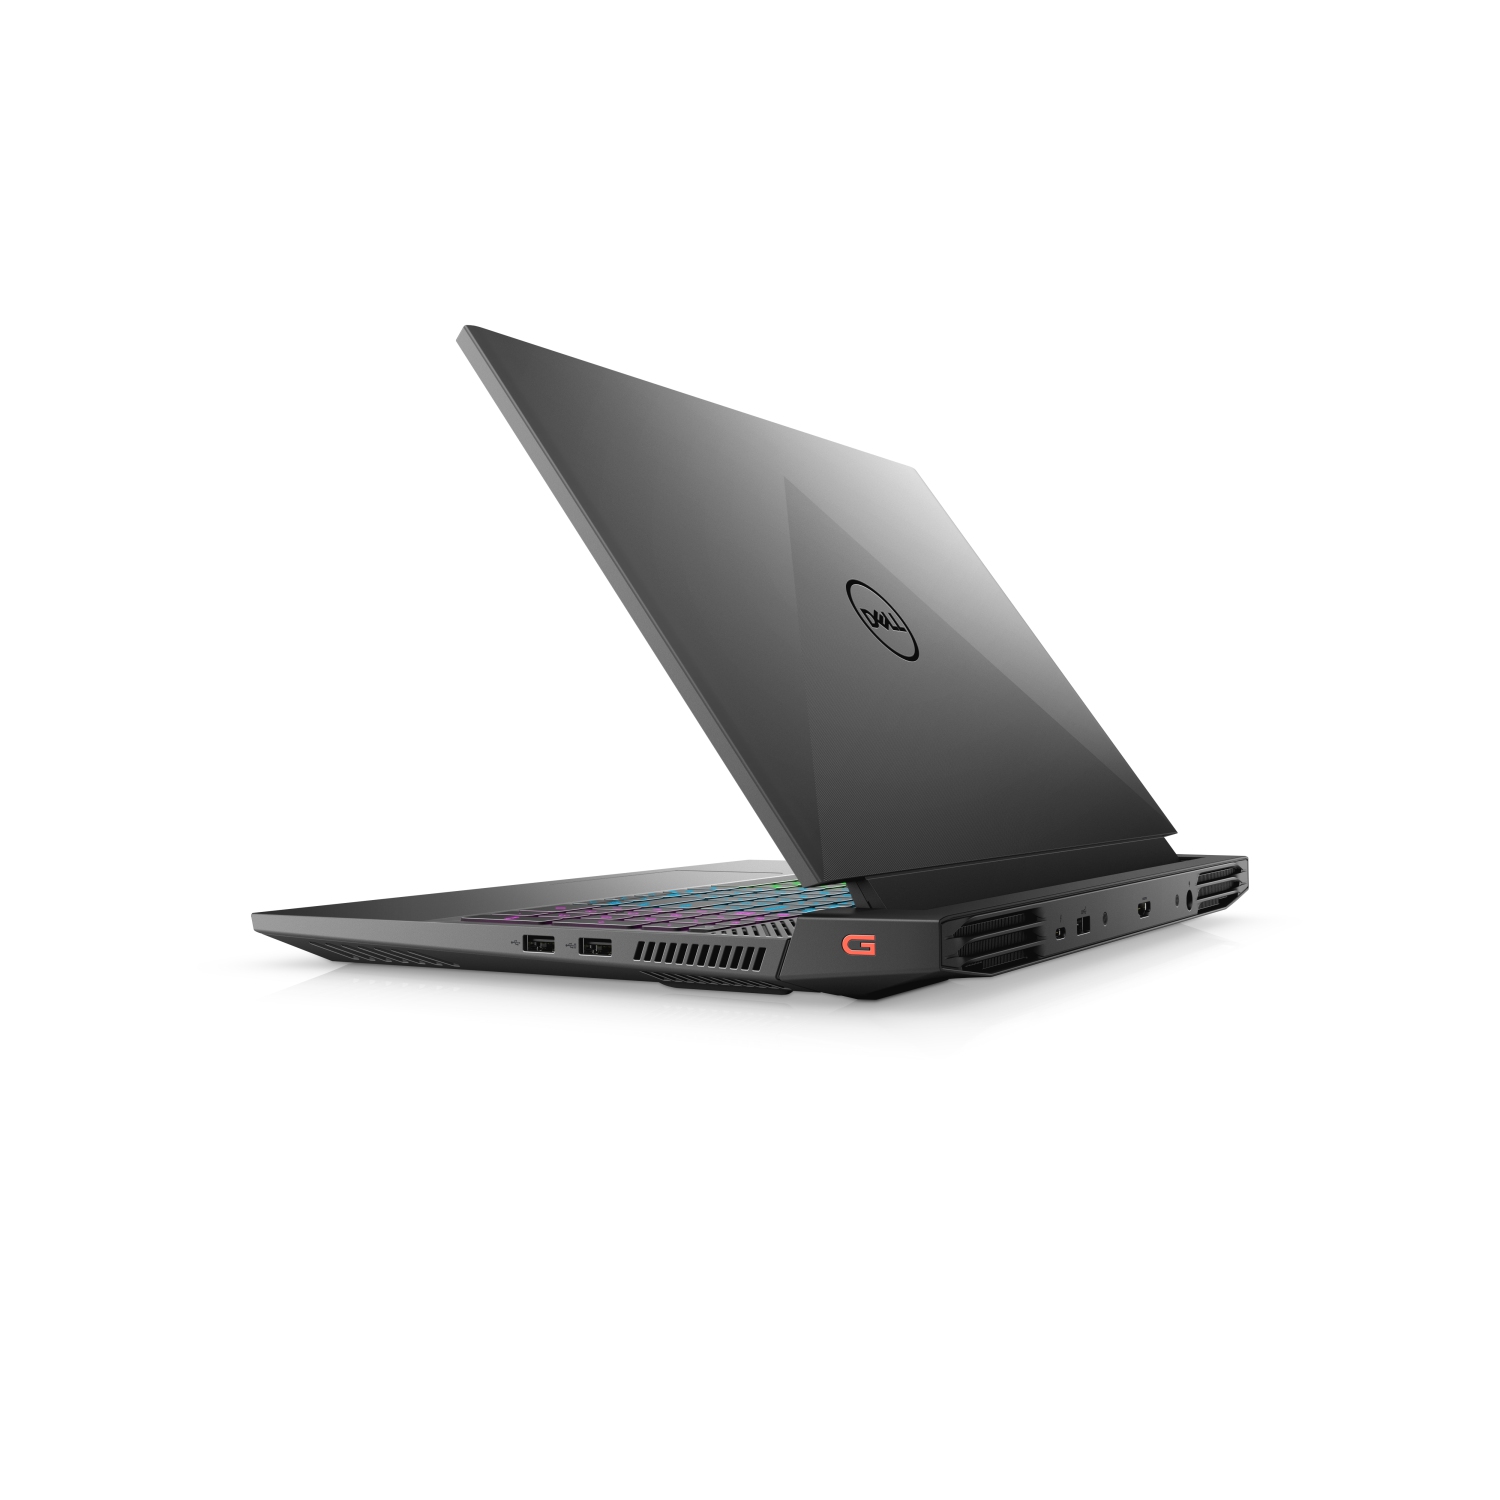 Refurbished (Excellent) – Dell G15 5511 Gaming Laptop (2021) | 15.6" FHD | Core i7 - 1TB SSD - 16GB RAM - RTX 3060 | 8 Cores @ 4.6 GHz - 11th Gen CPU - 6GB GDDR6